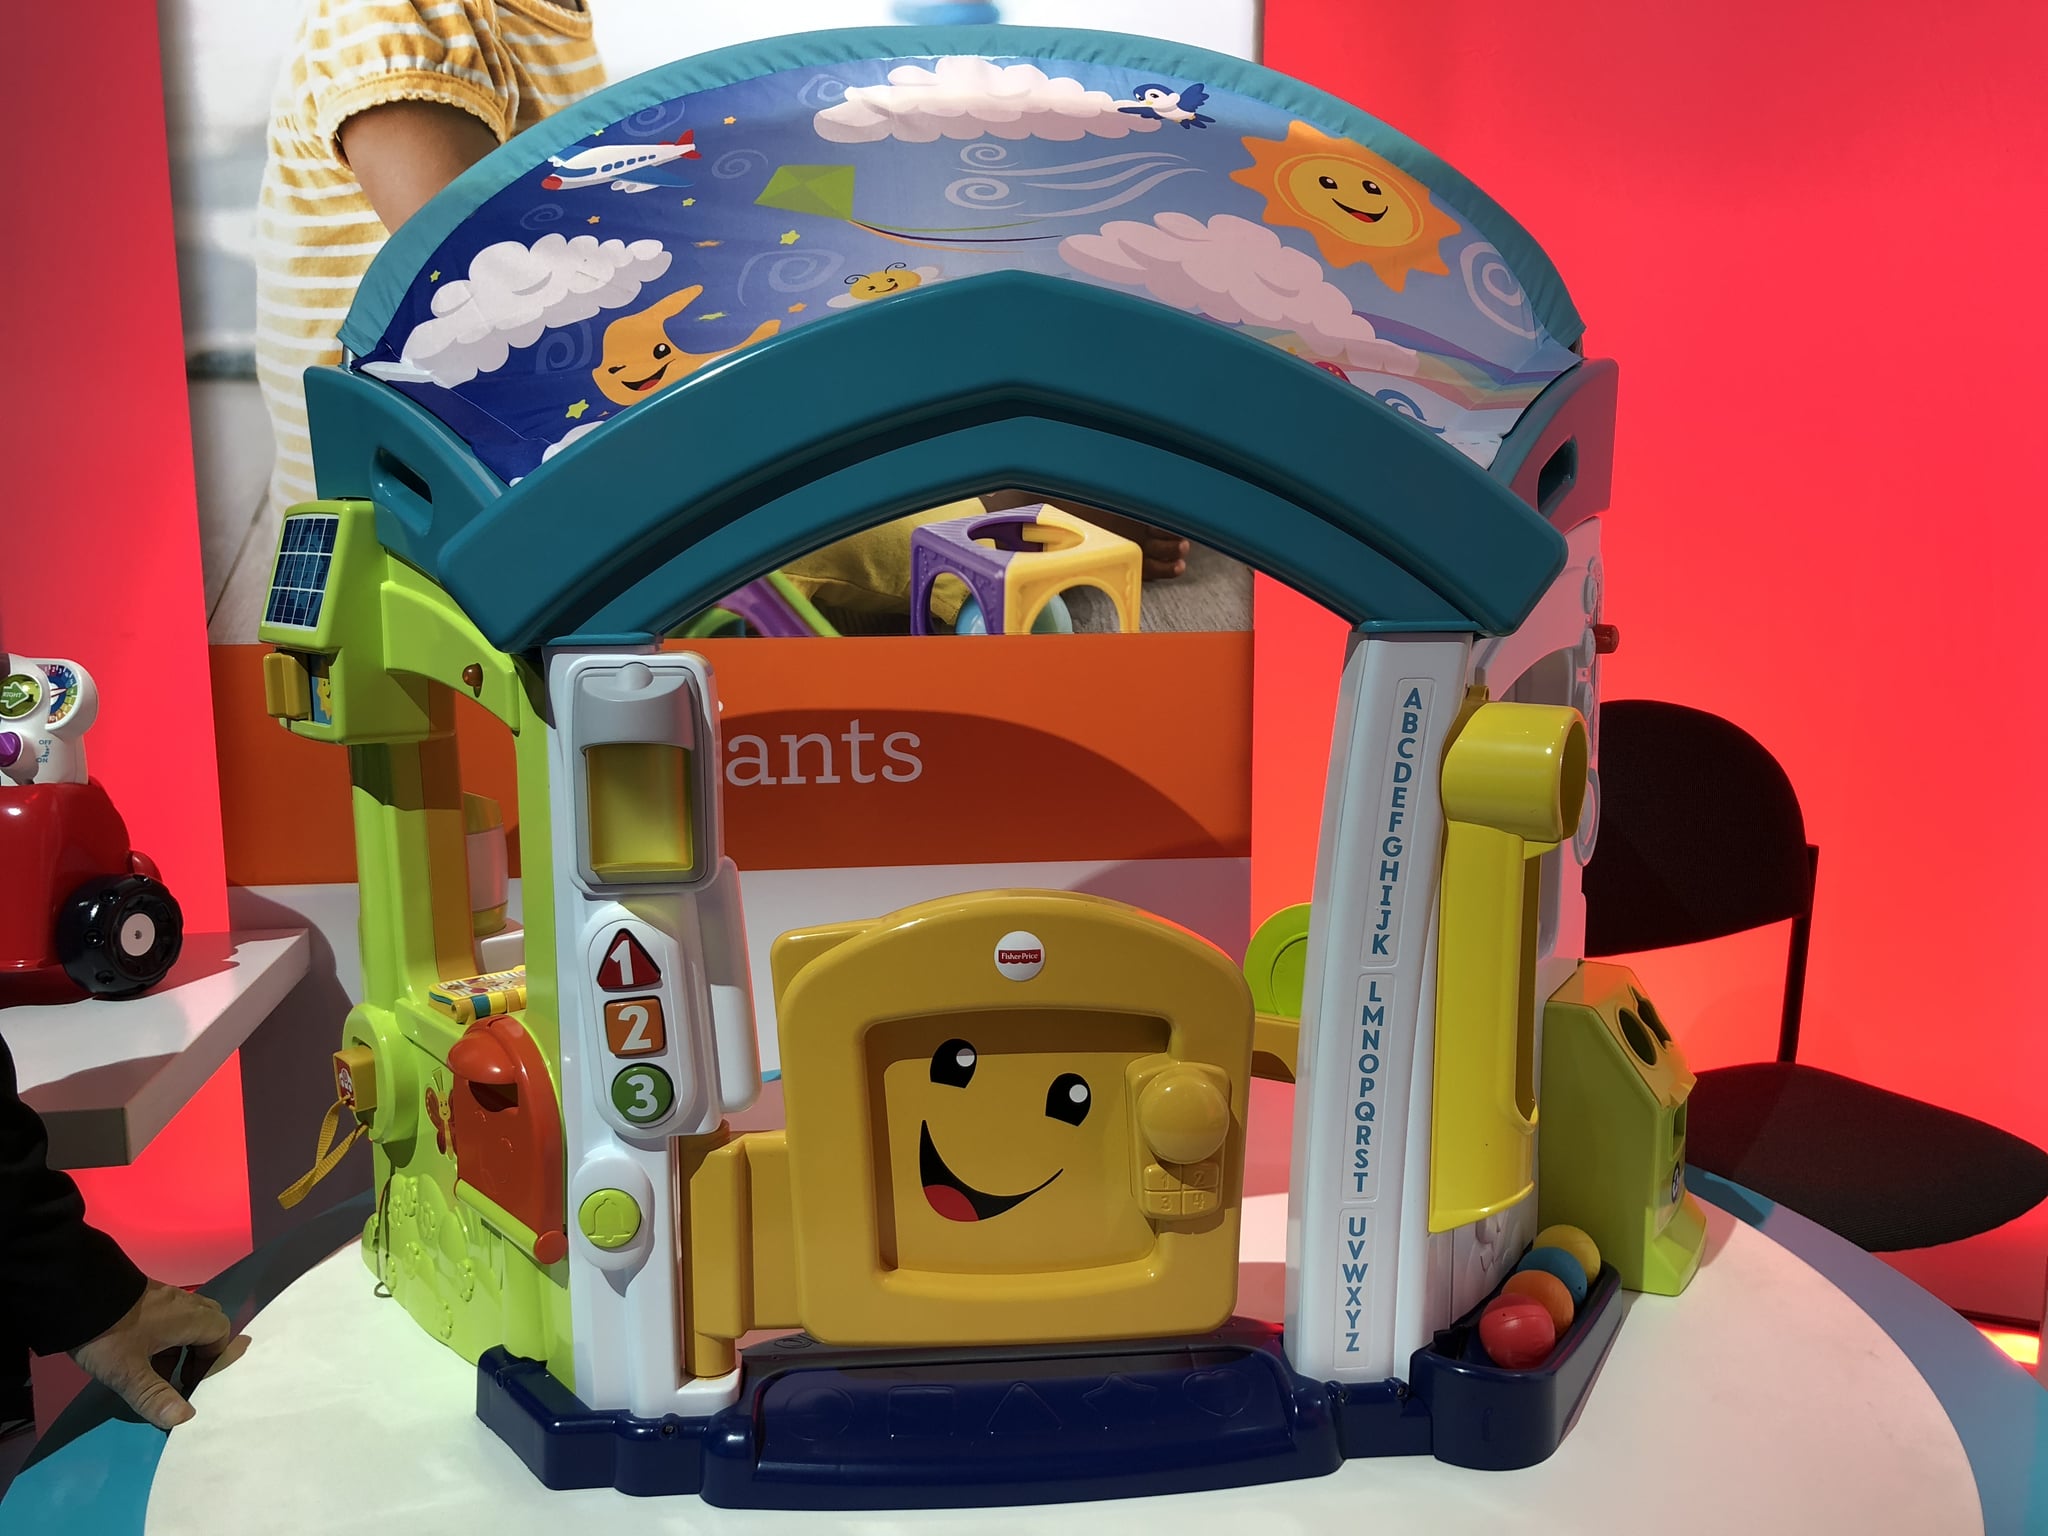 fisher price learning smart home